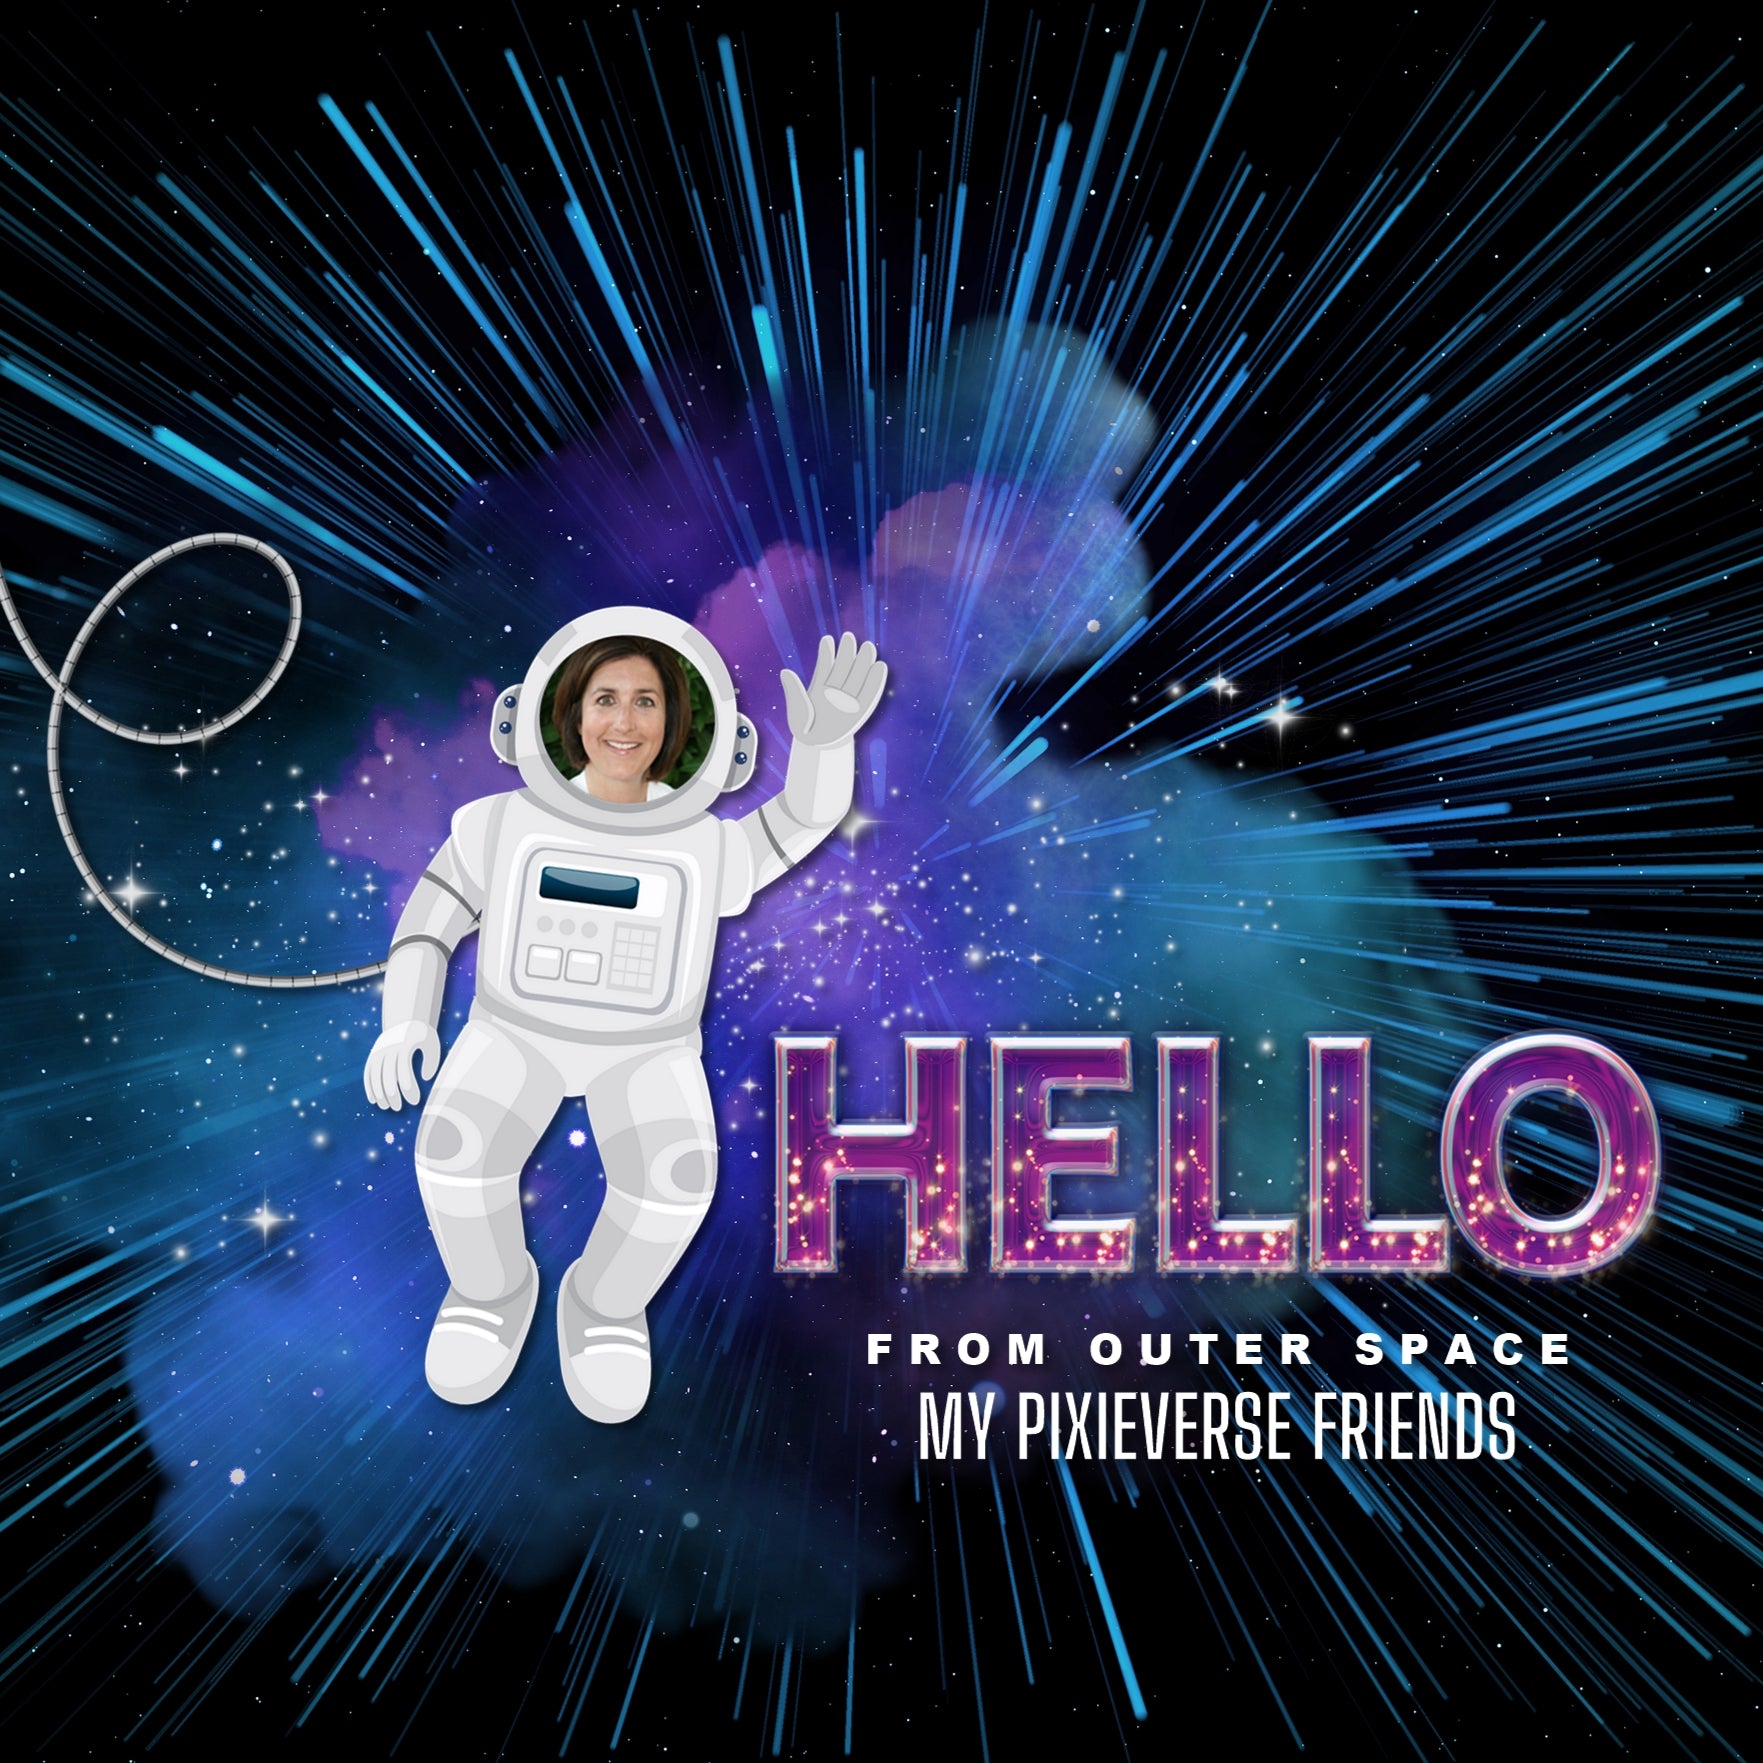 This ‘Out of this World’ Alpha Set features a starry galaxy-like background. The Alpha Set by Lucky Girl Creative includes 1 Uppercase Alpha Set + Numbers + 30 Special Characters / Punctuation. Great for pages including Toy Story, Star Wars, Star Trek, Guardians of the Galaxy, Lightyear, NASA, SpaceX, space exploration, and space observatory trips.